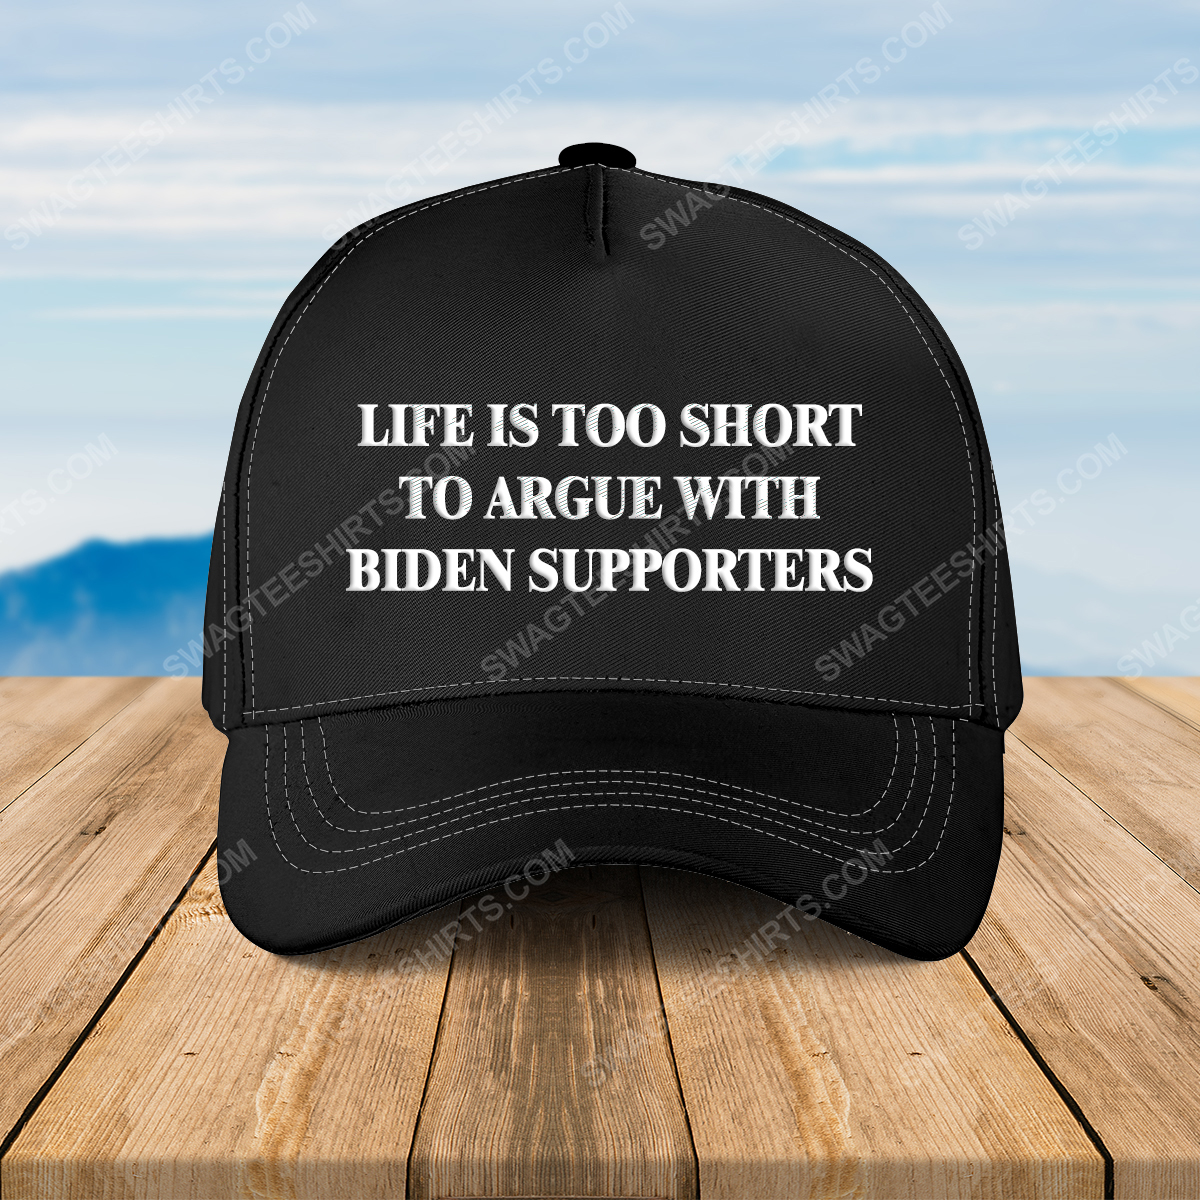 Life is too short to argue with biden supporters full print classic hat 1 - Copy (2)